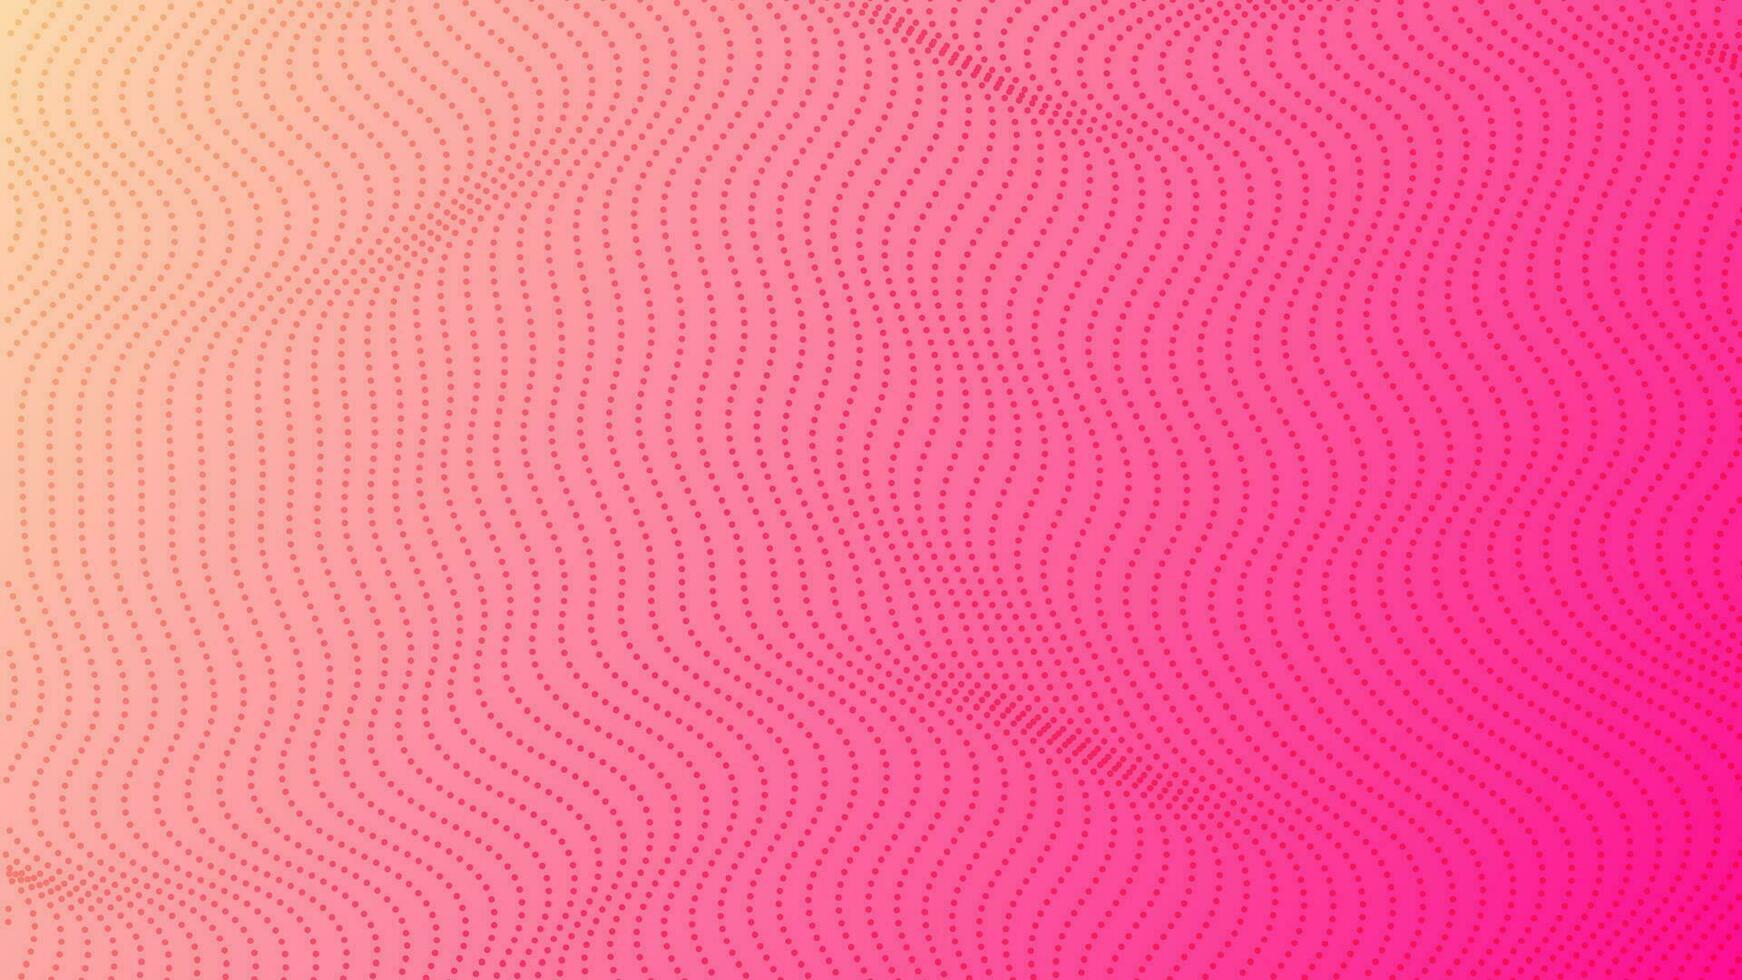 Halftone gradient background with dots. Abstract pink dotted pop art pattern in comic style. Vector illustration